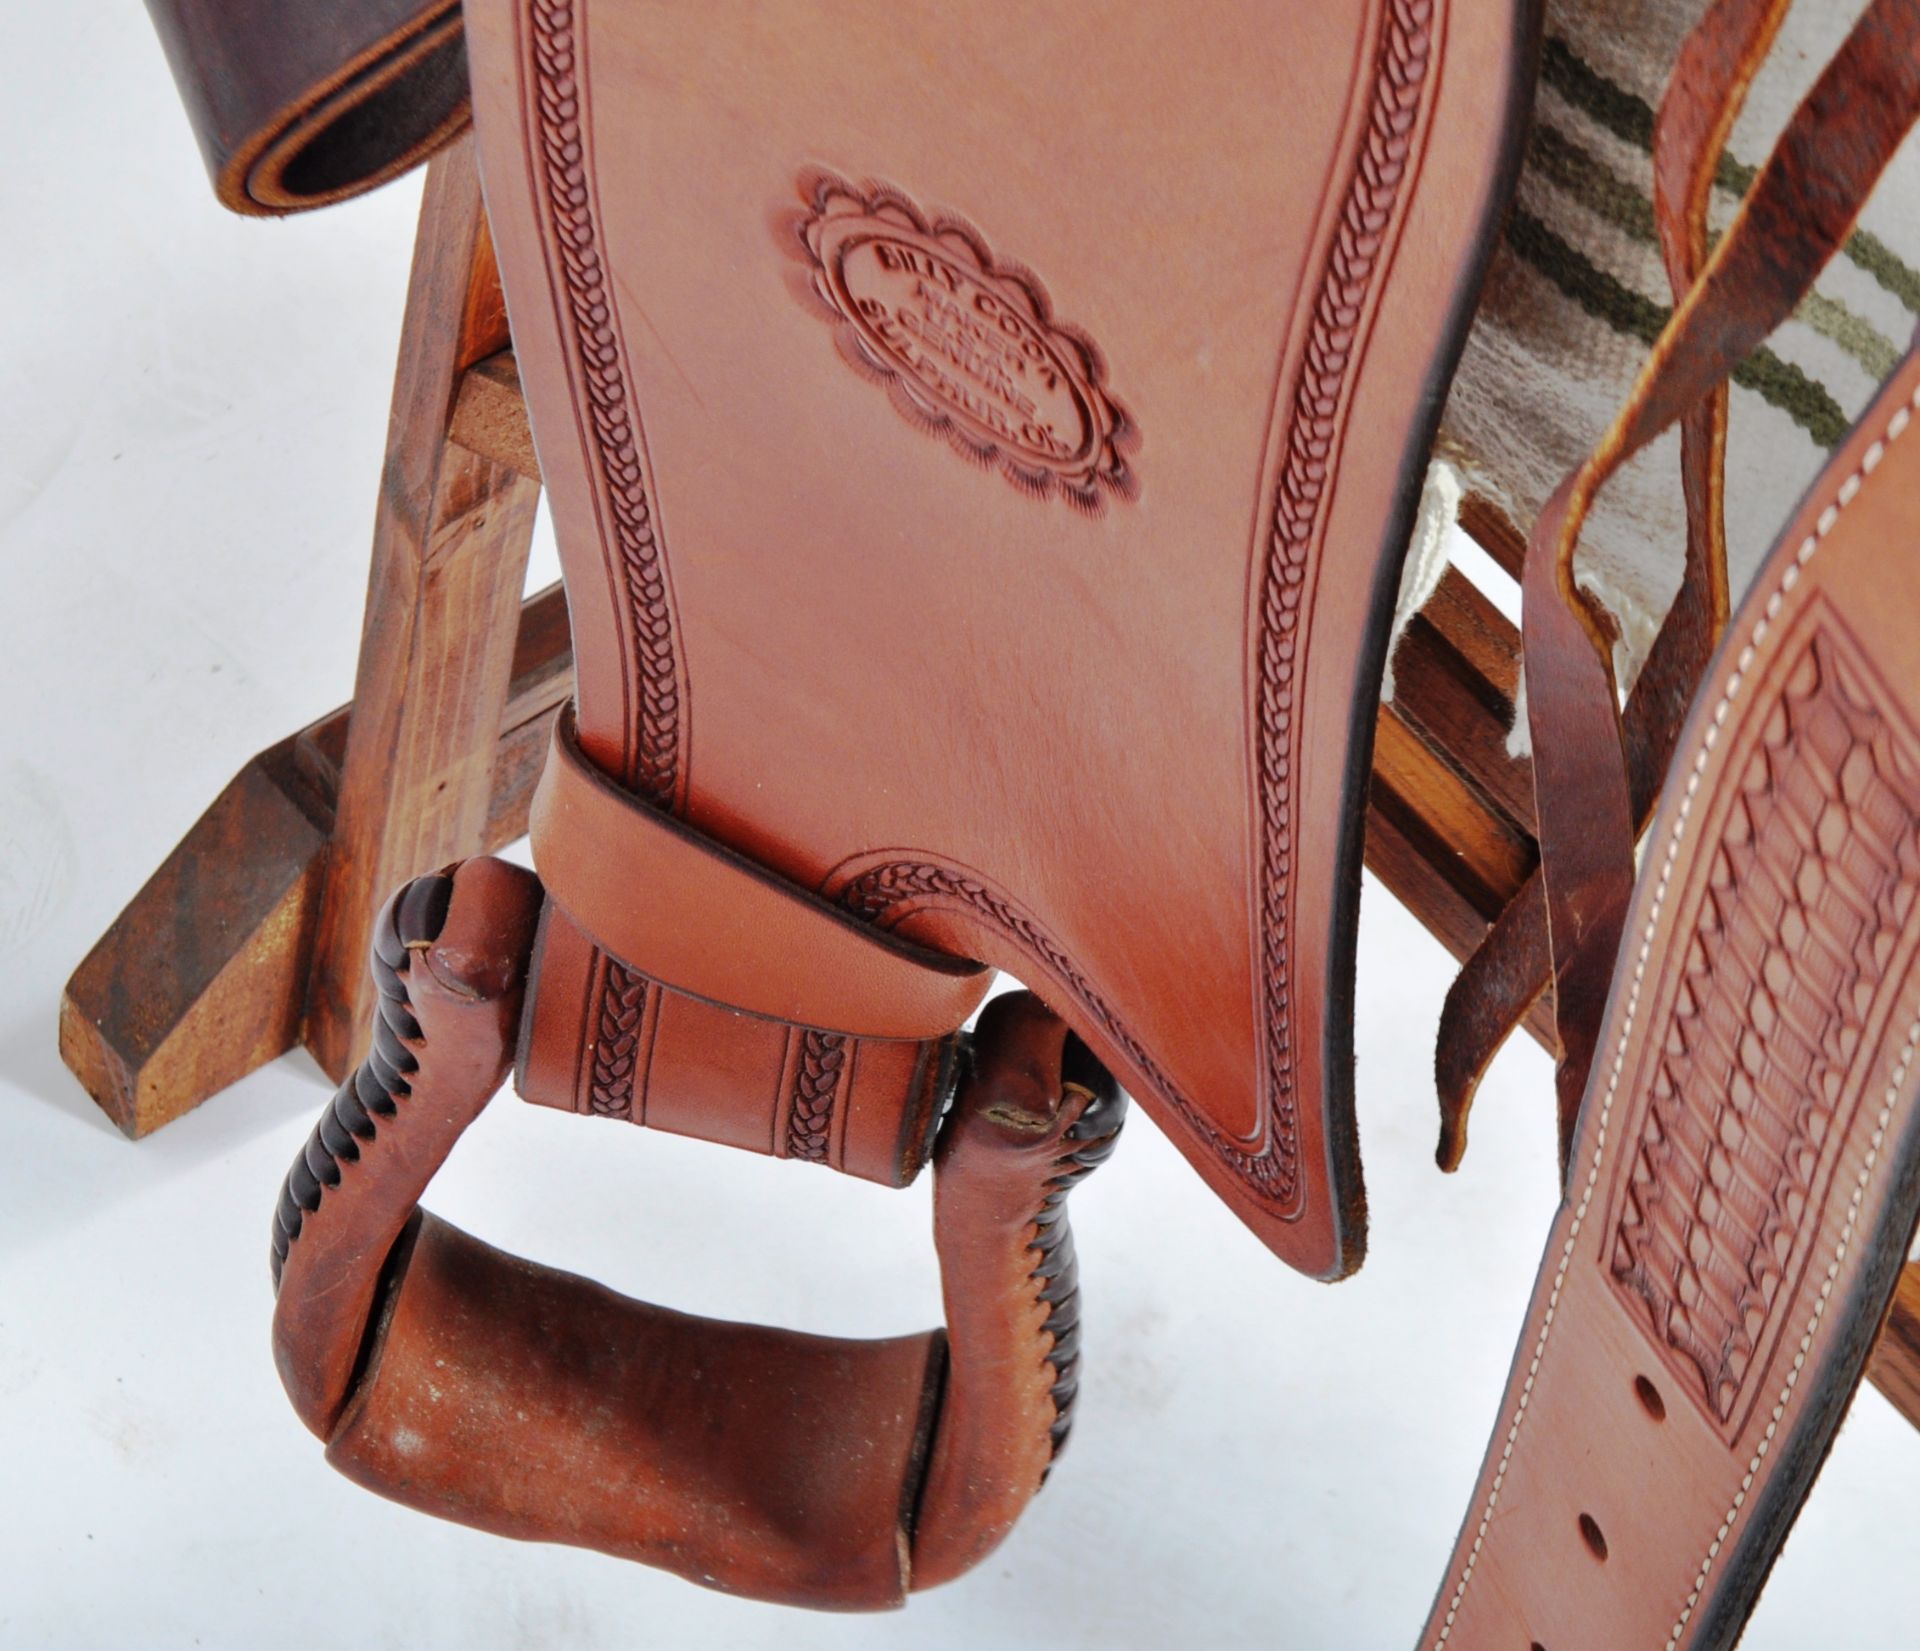 BILLY COOK HIGH QUALITY LEATHER SADDLE - Image 11 of 11